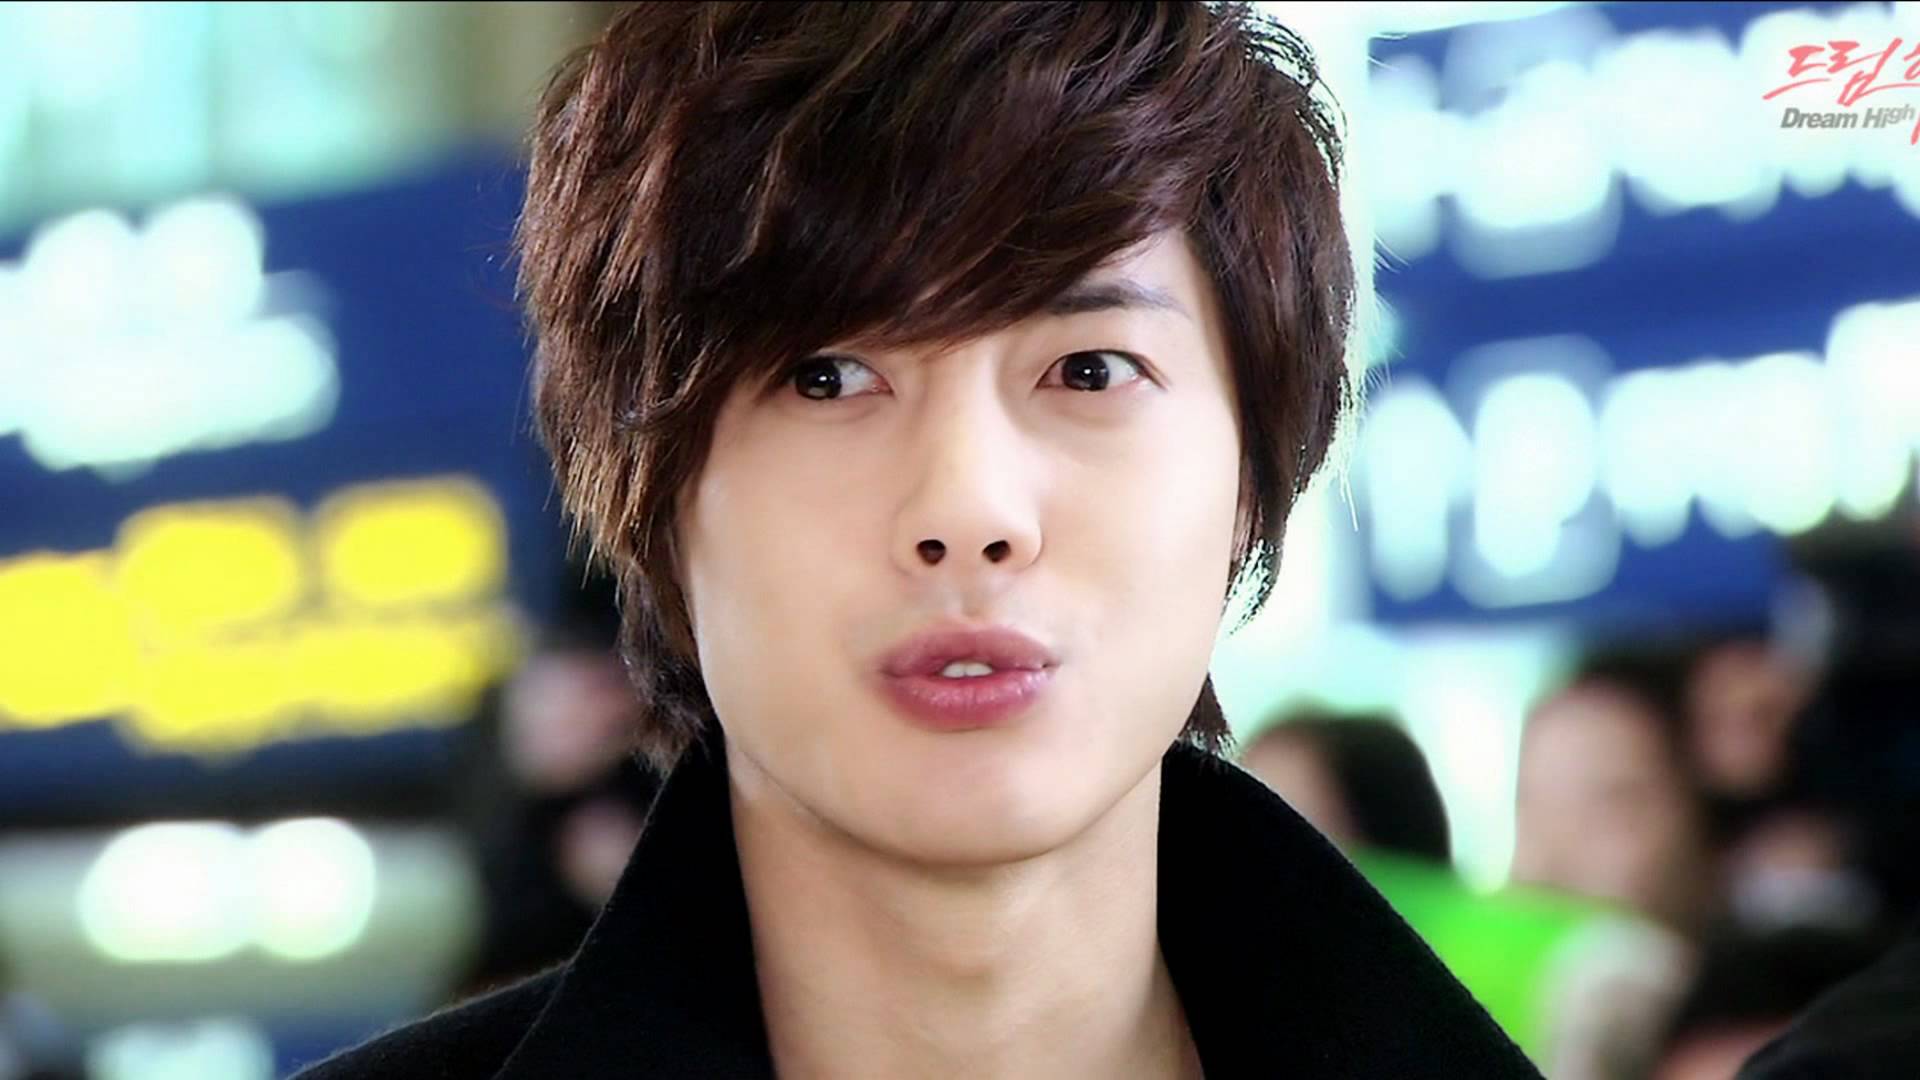 Kim Hyun Joong Wallpapers High Resolution and Quality Download